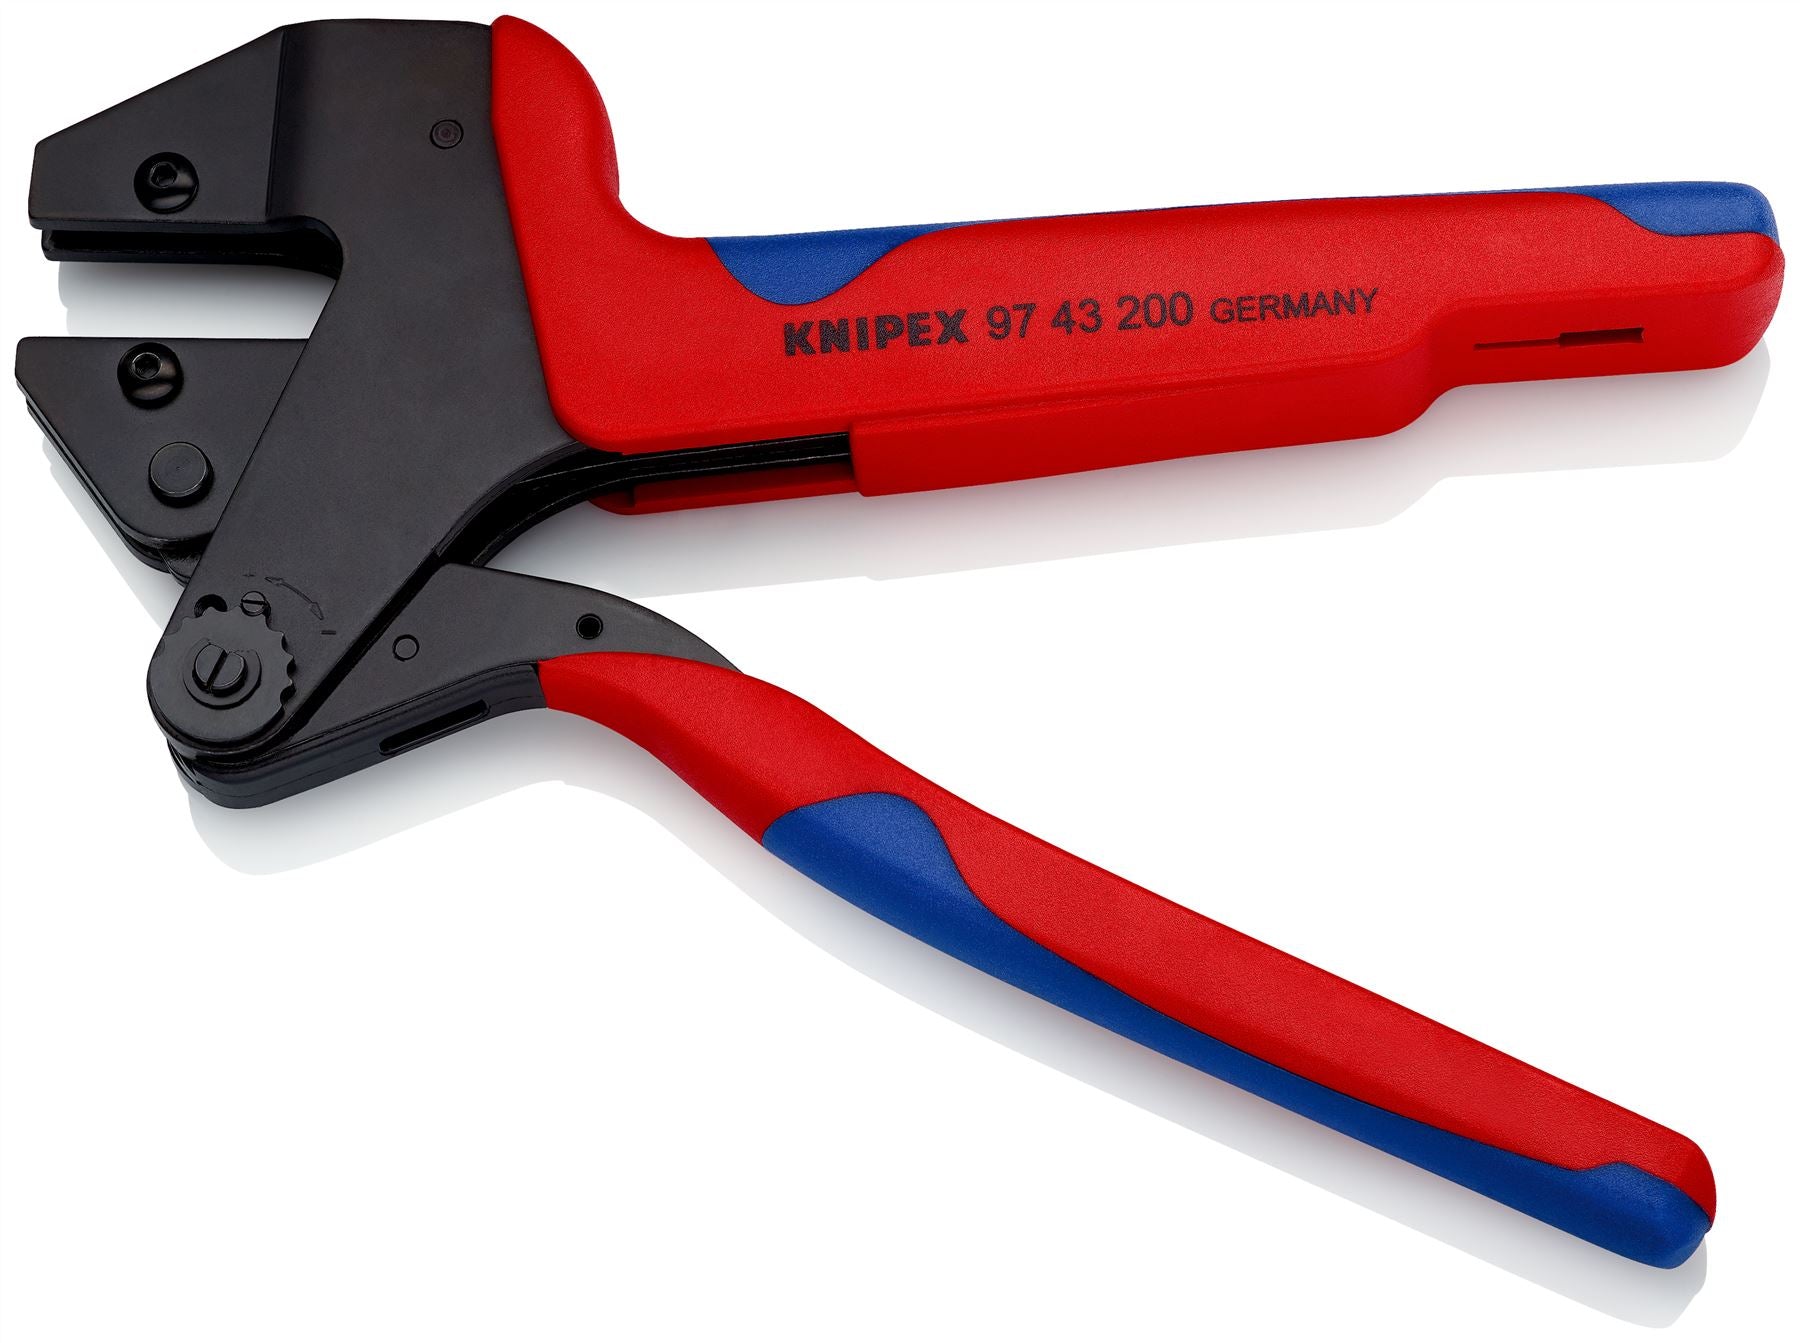 KNIPEX Crimp System Pliers without Crimping Dies 200mm 97 43 200 A